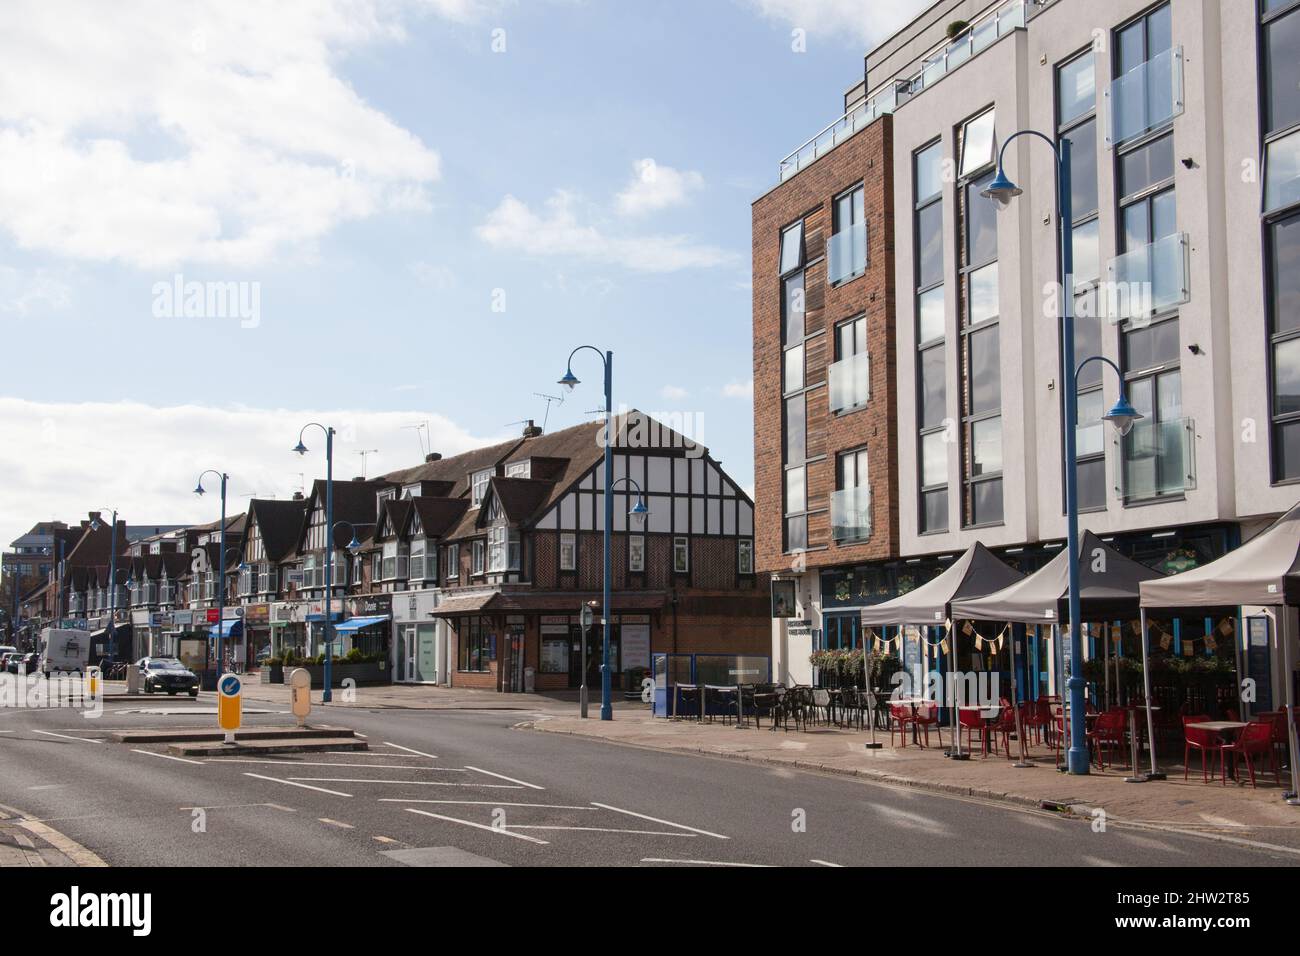 Views of Potters Bar, Hertfordshire in the UK Stock Photo